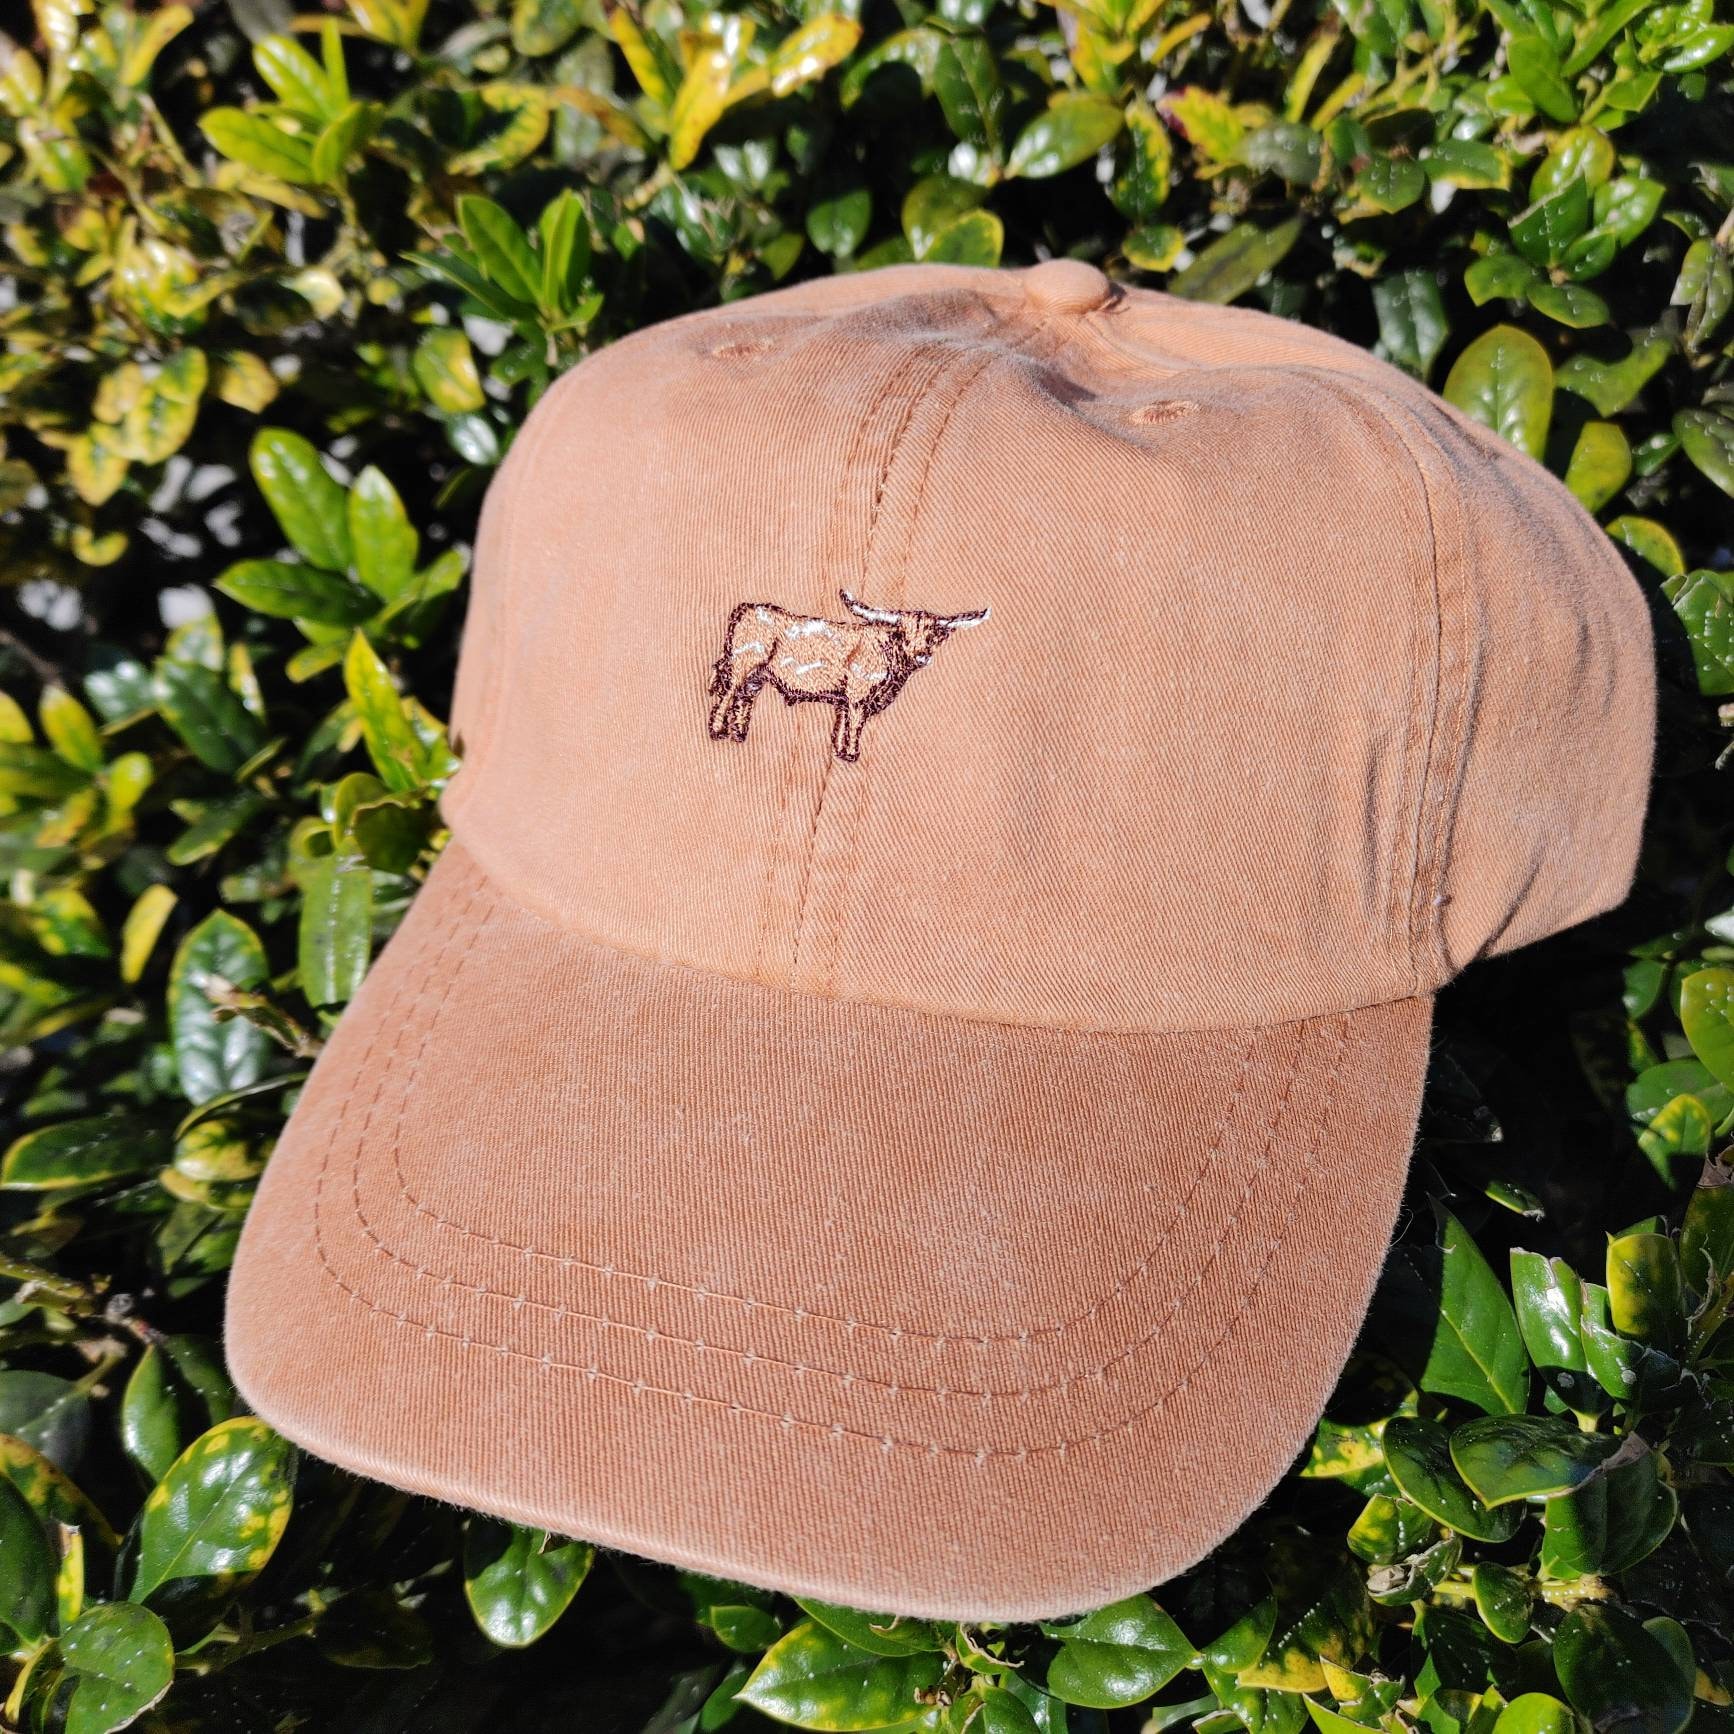 Great Gift - Unisex 100% Polyester Wide Brim Longhorn Cattle Cow